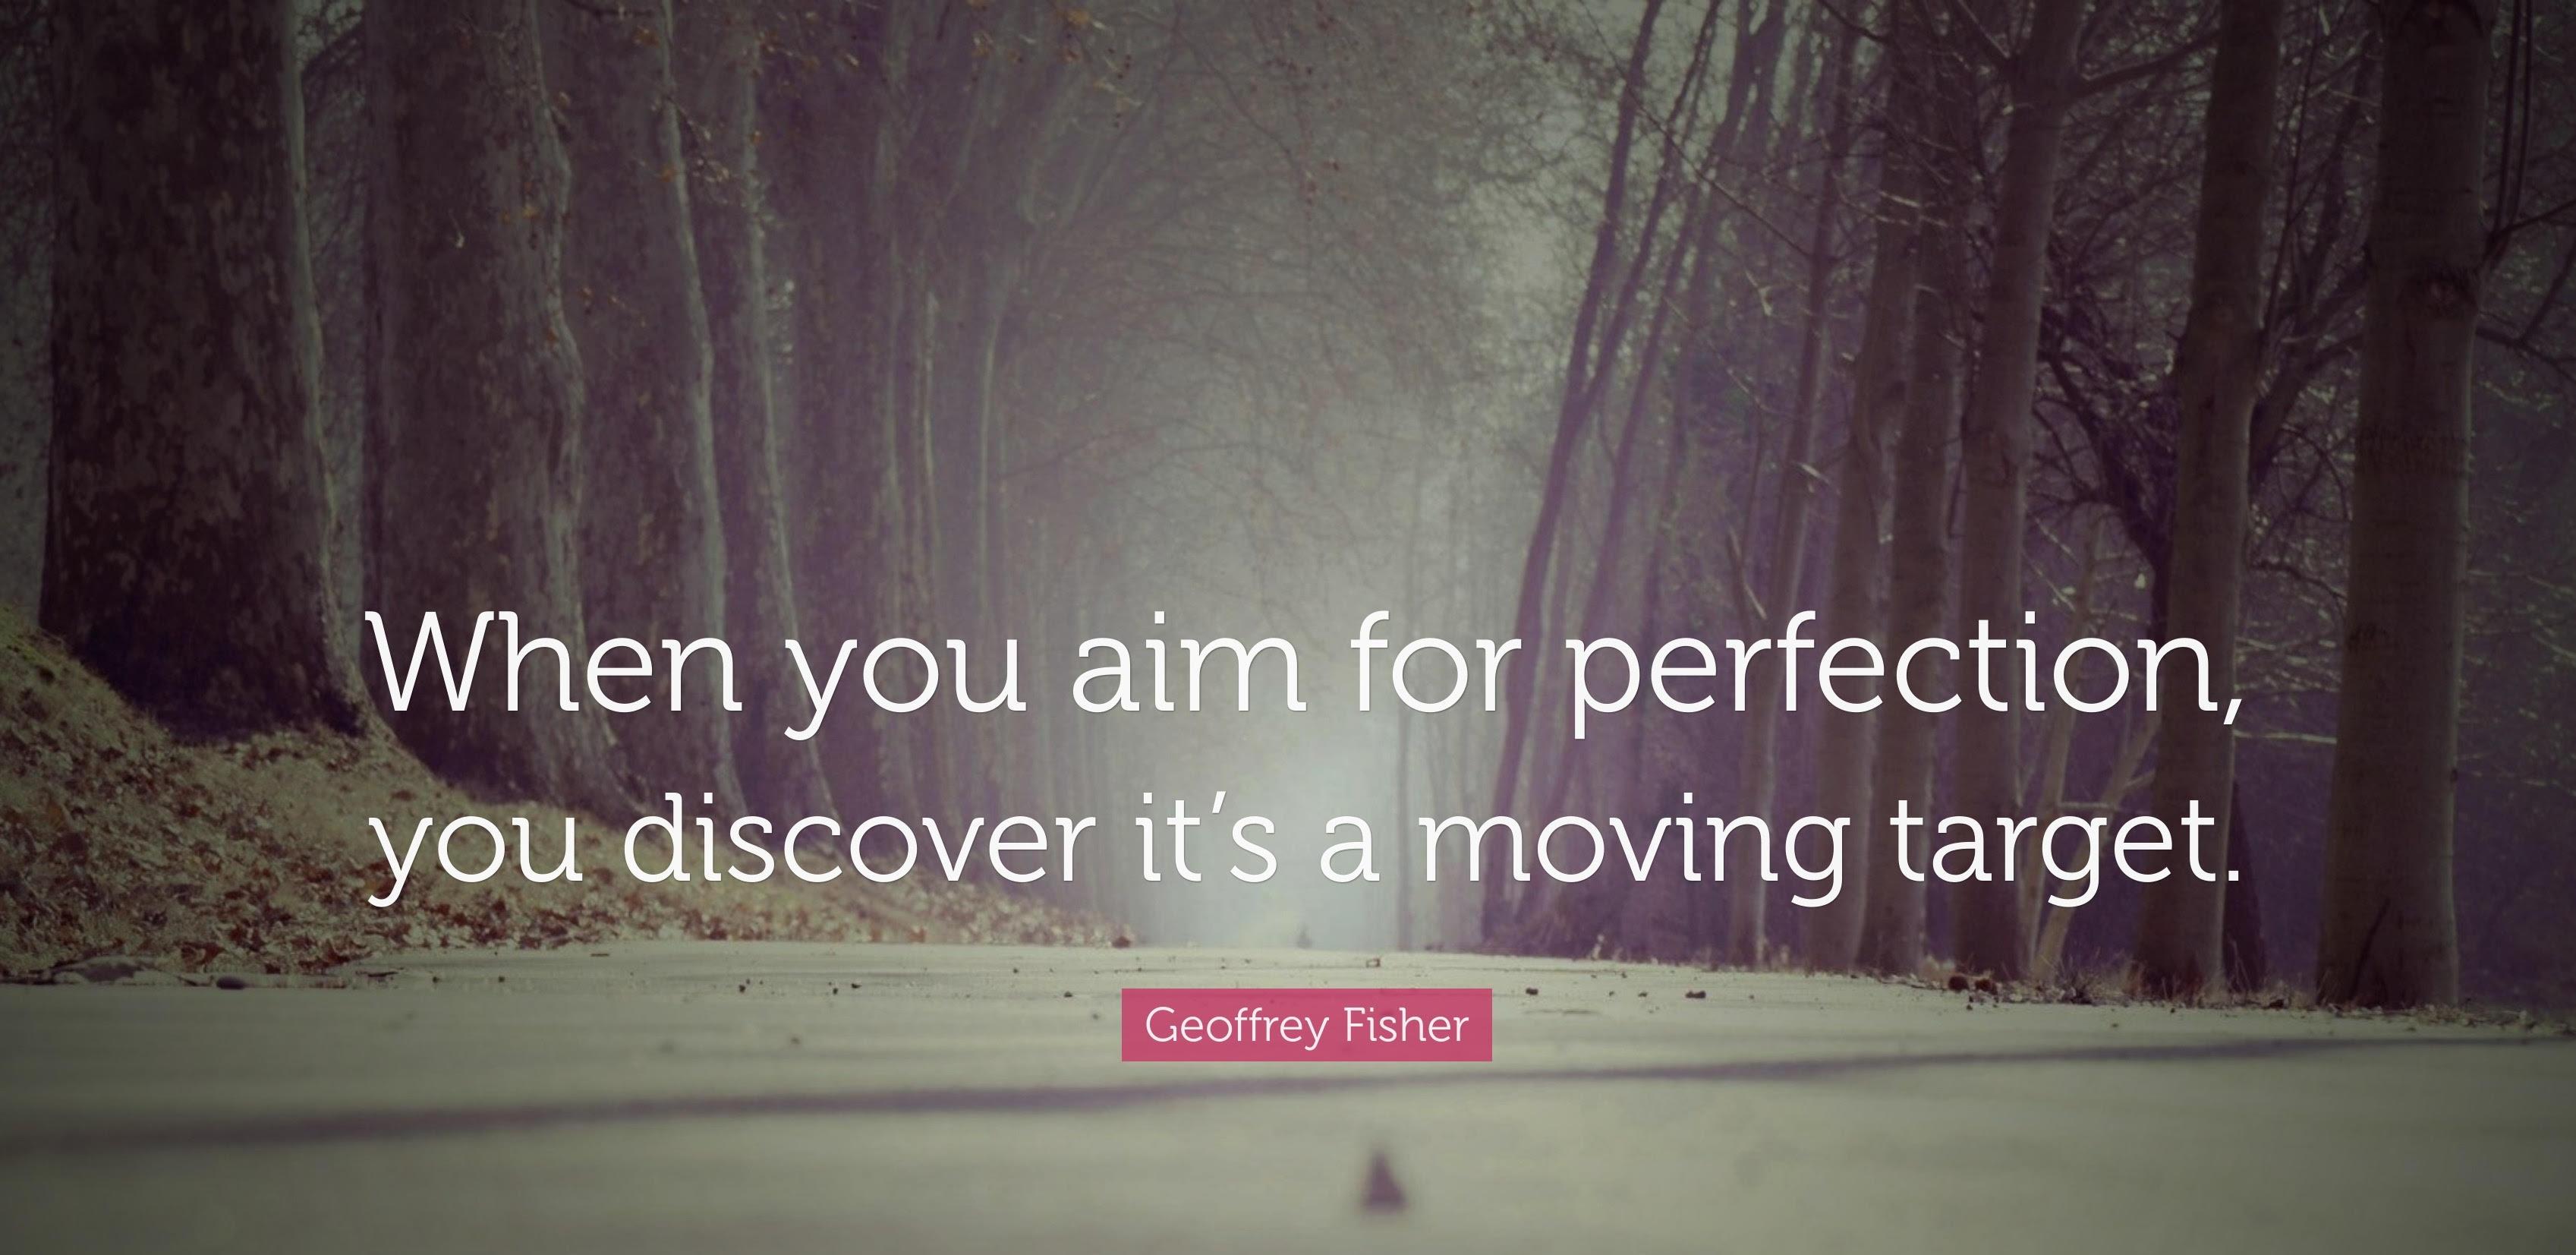 When you aim for perfection, you discover it's a moving target. -Geoffrey Fischer